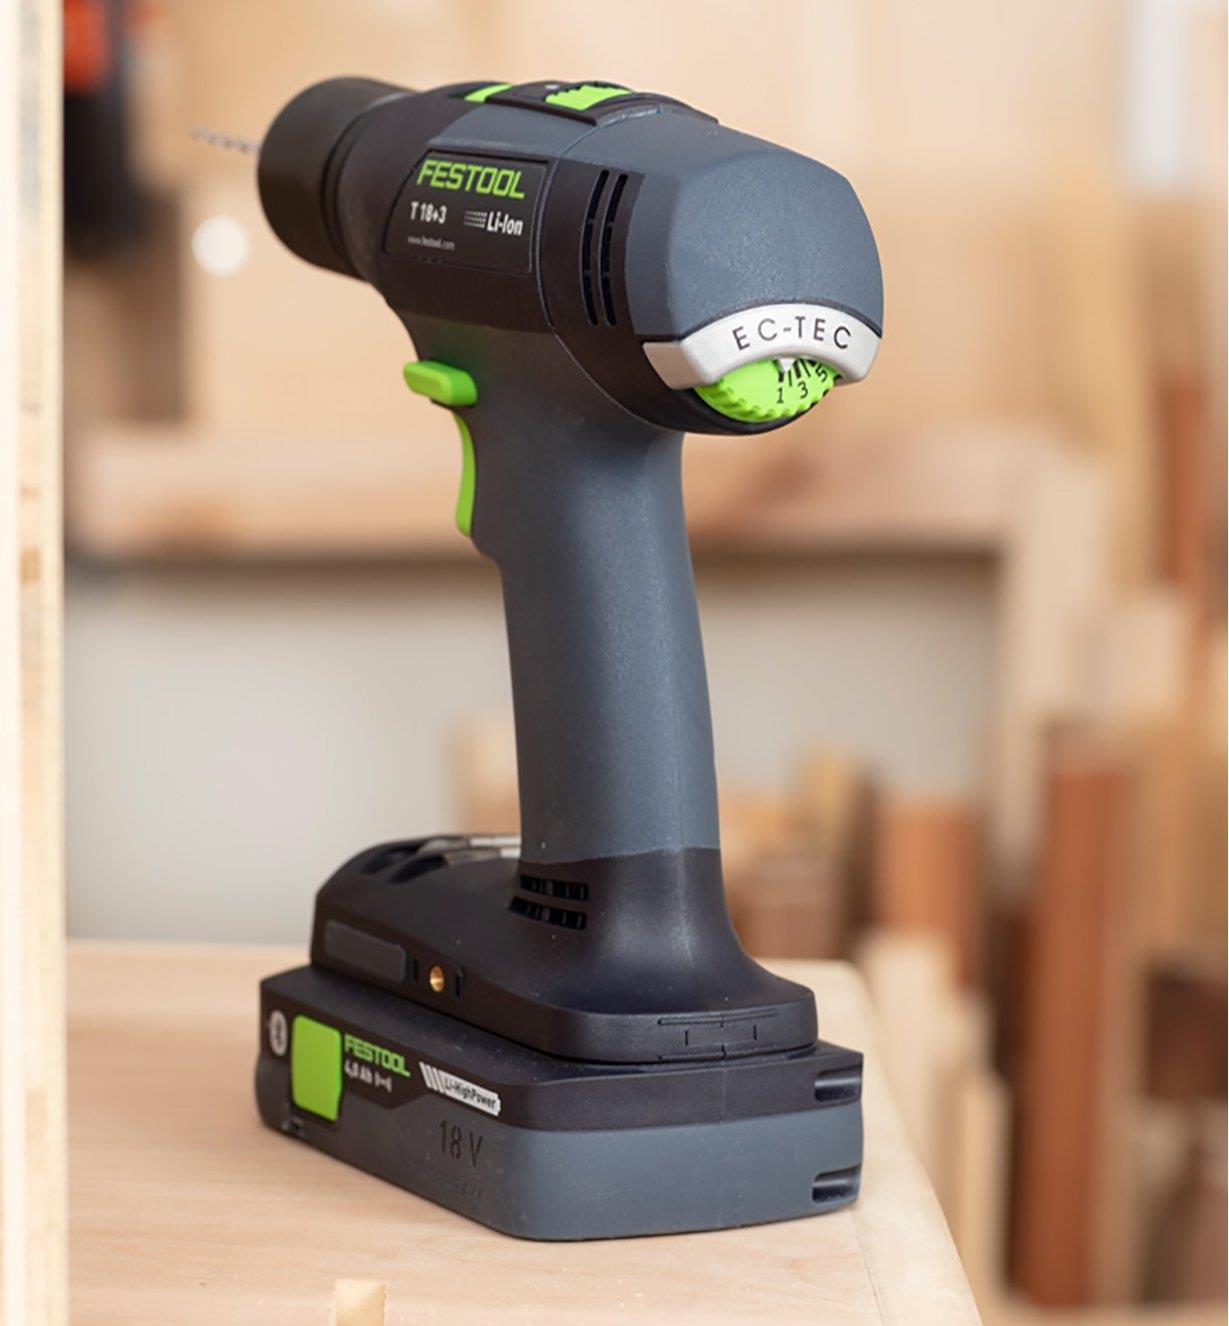 The Festool T 18_3 Easy cordless drill equipped with the 4.0 battery